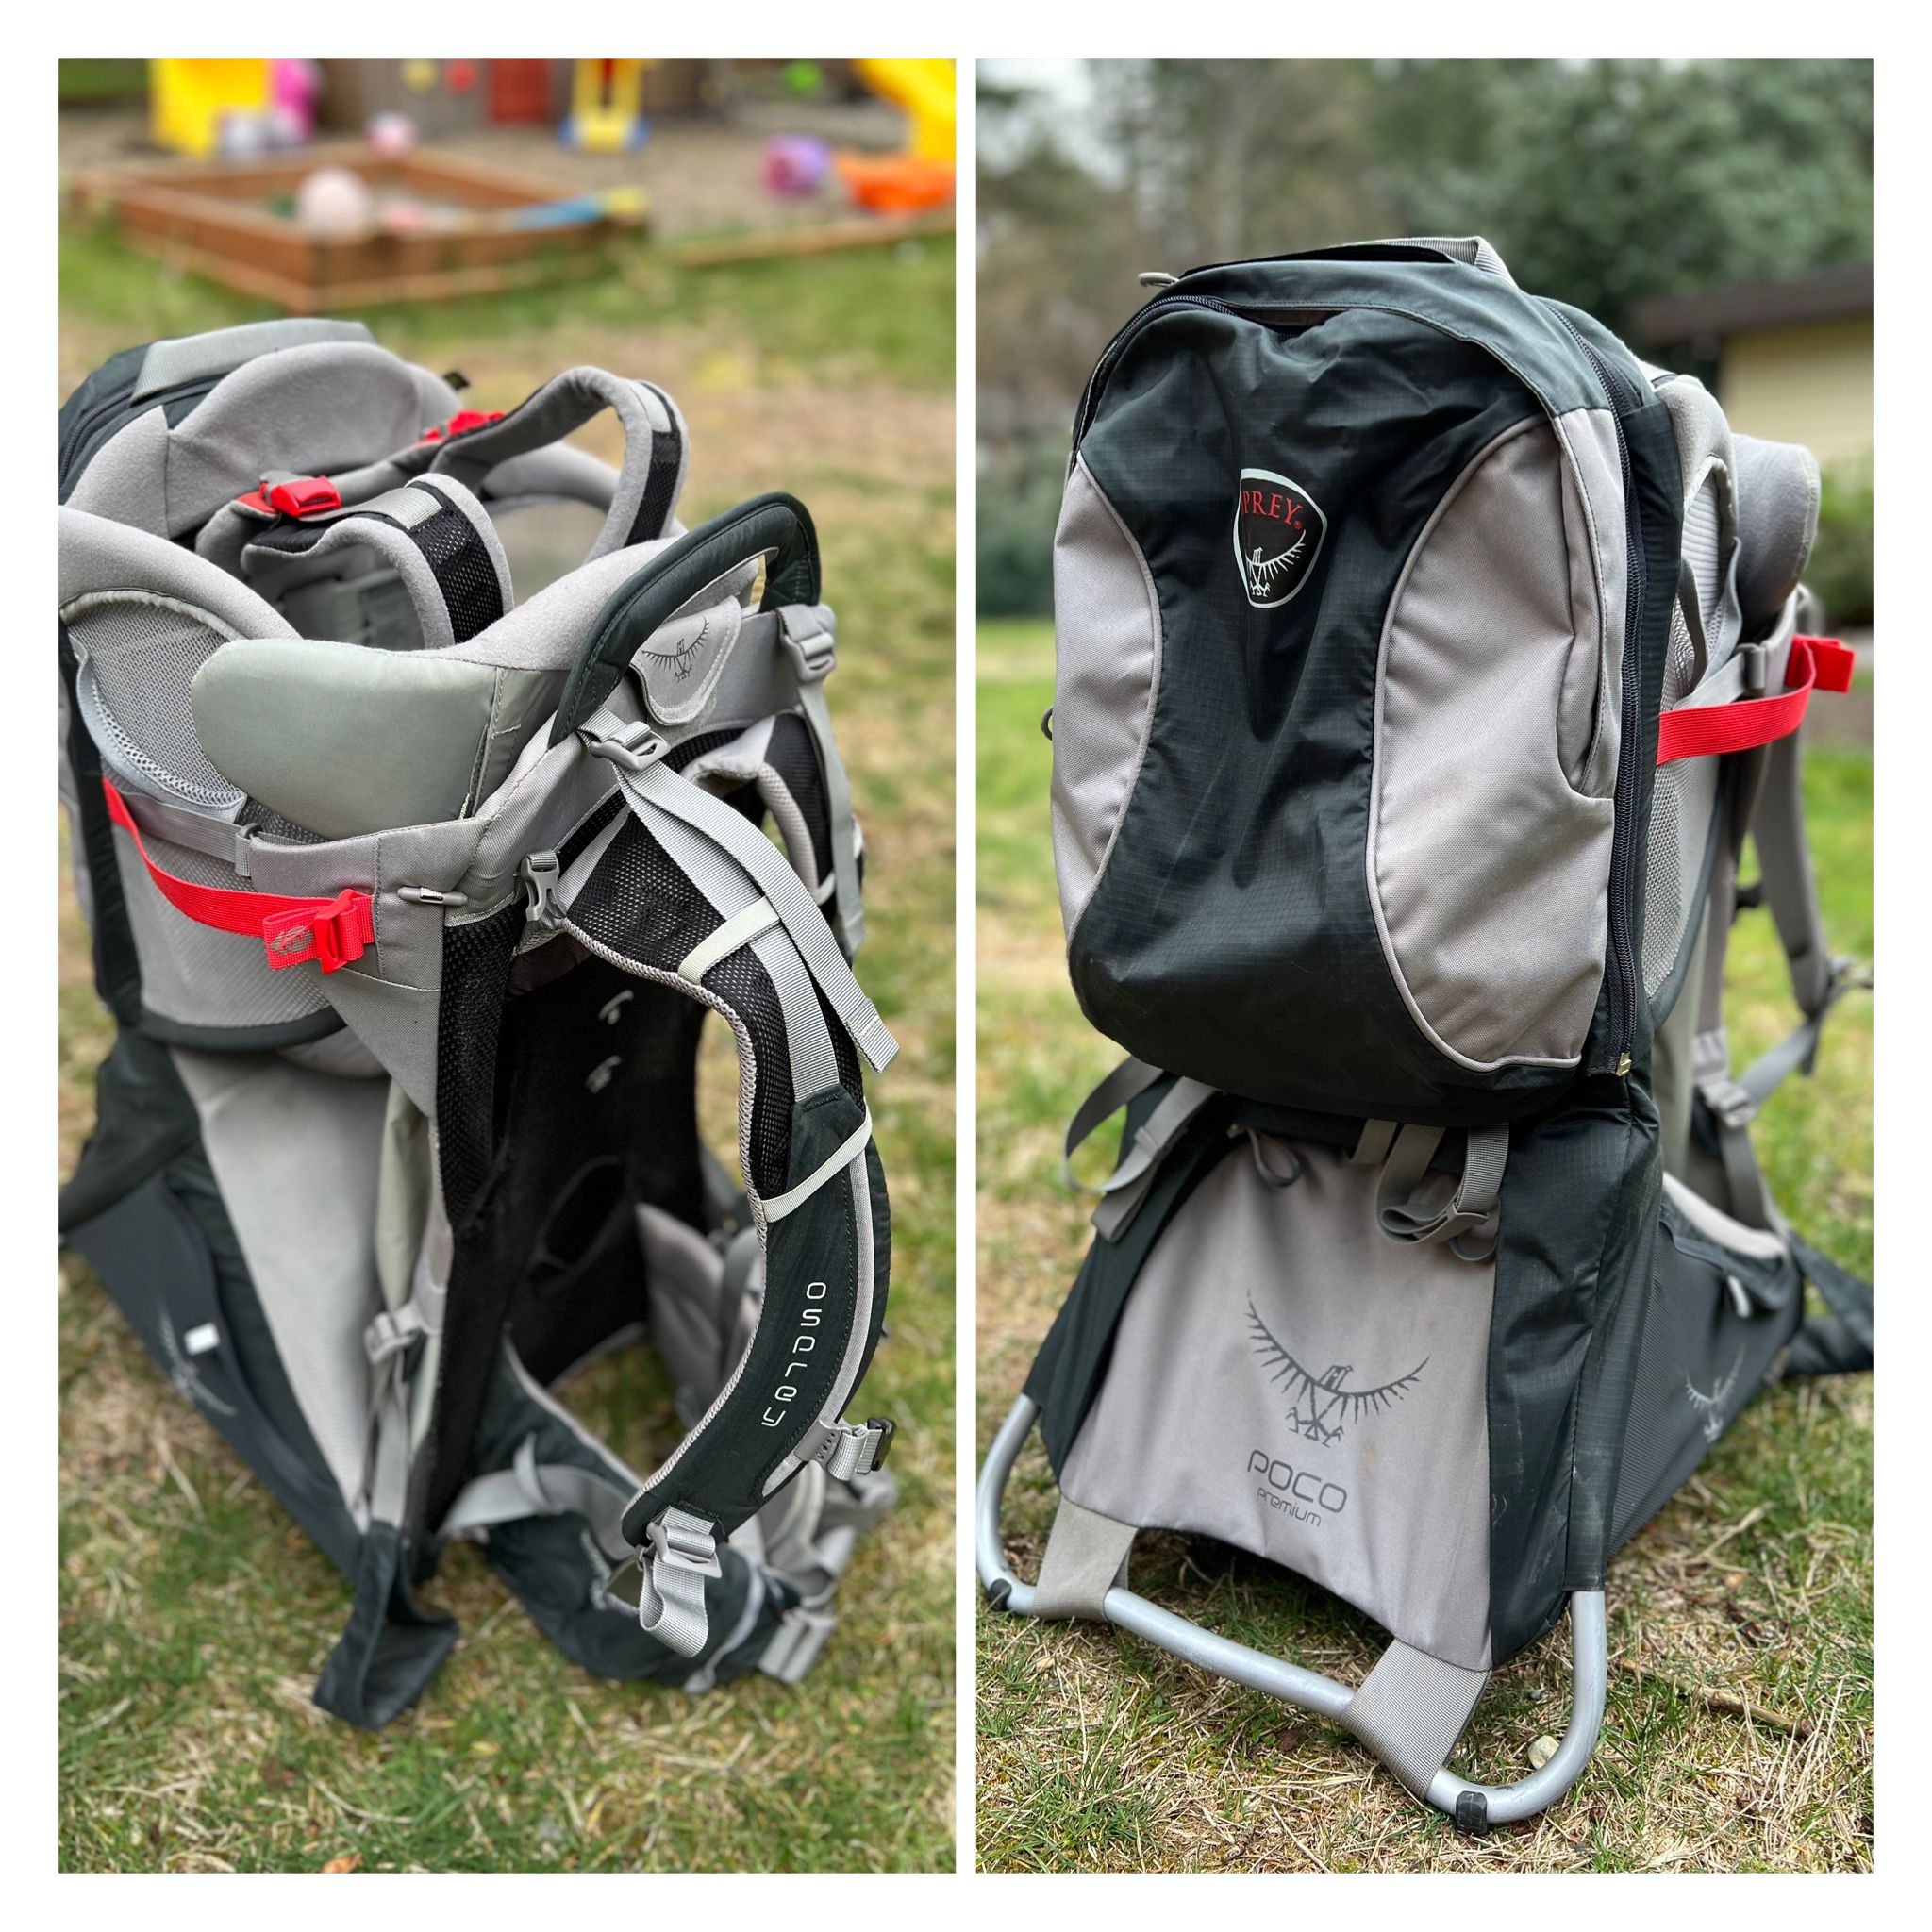 Hiking Child Carrier and Backpack.